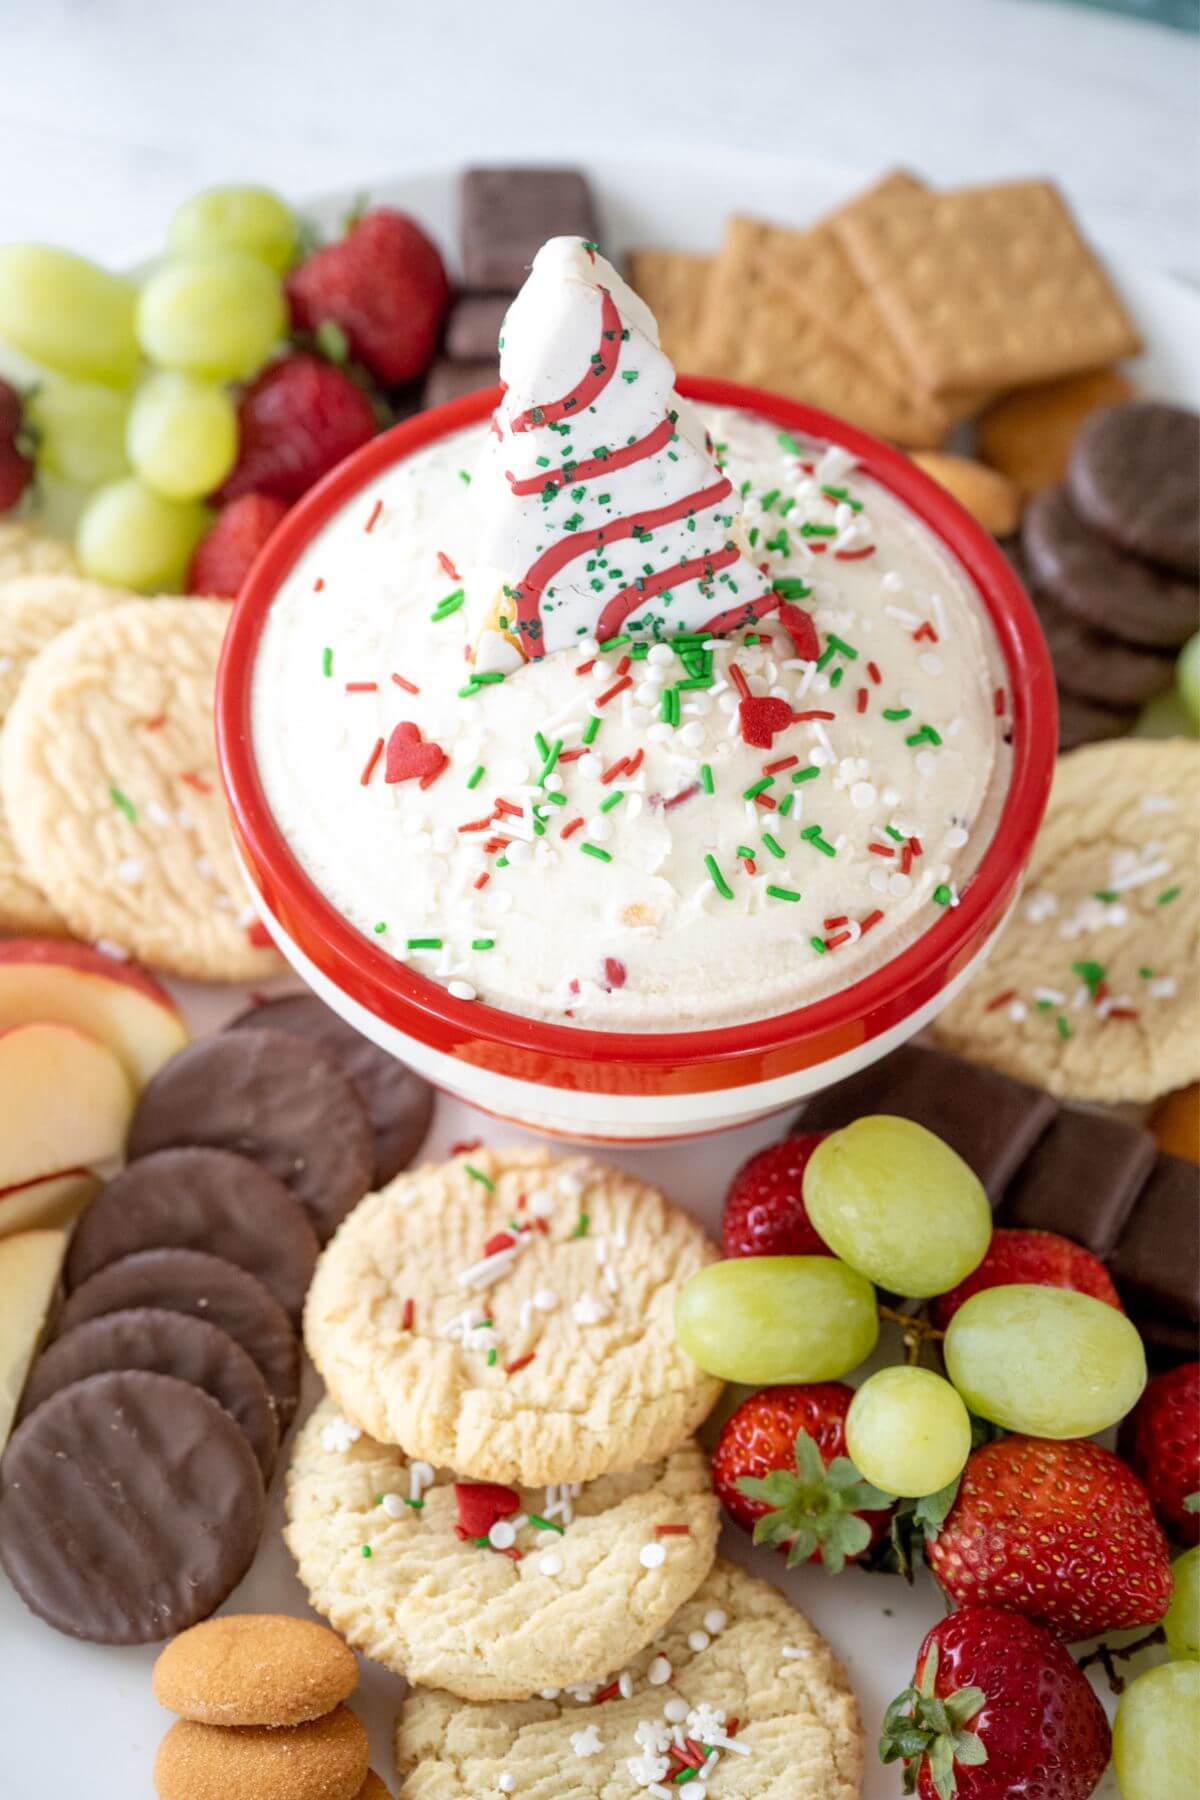 Bowl of dip in middle of platter with cookies, fruit, chocolate dippers.